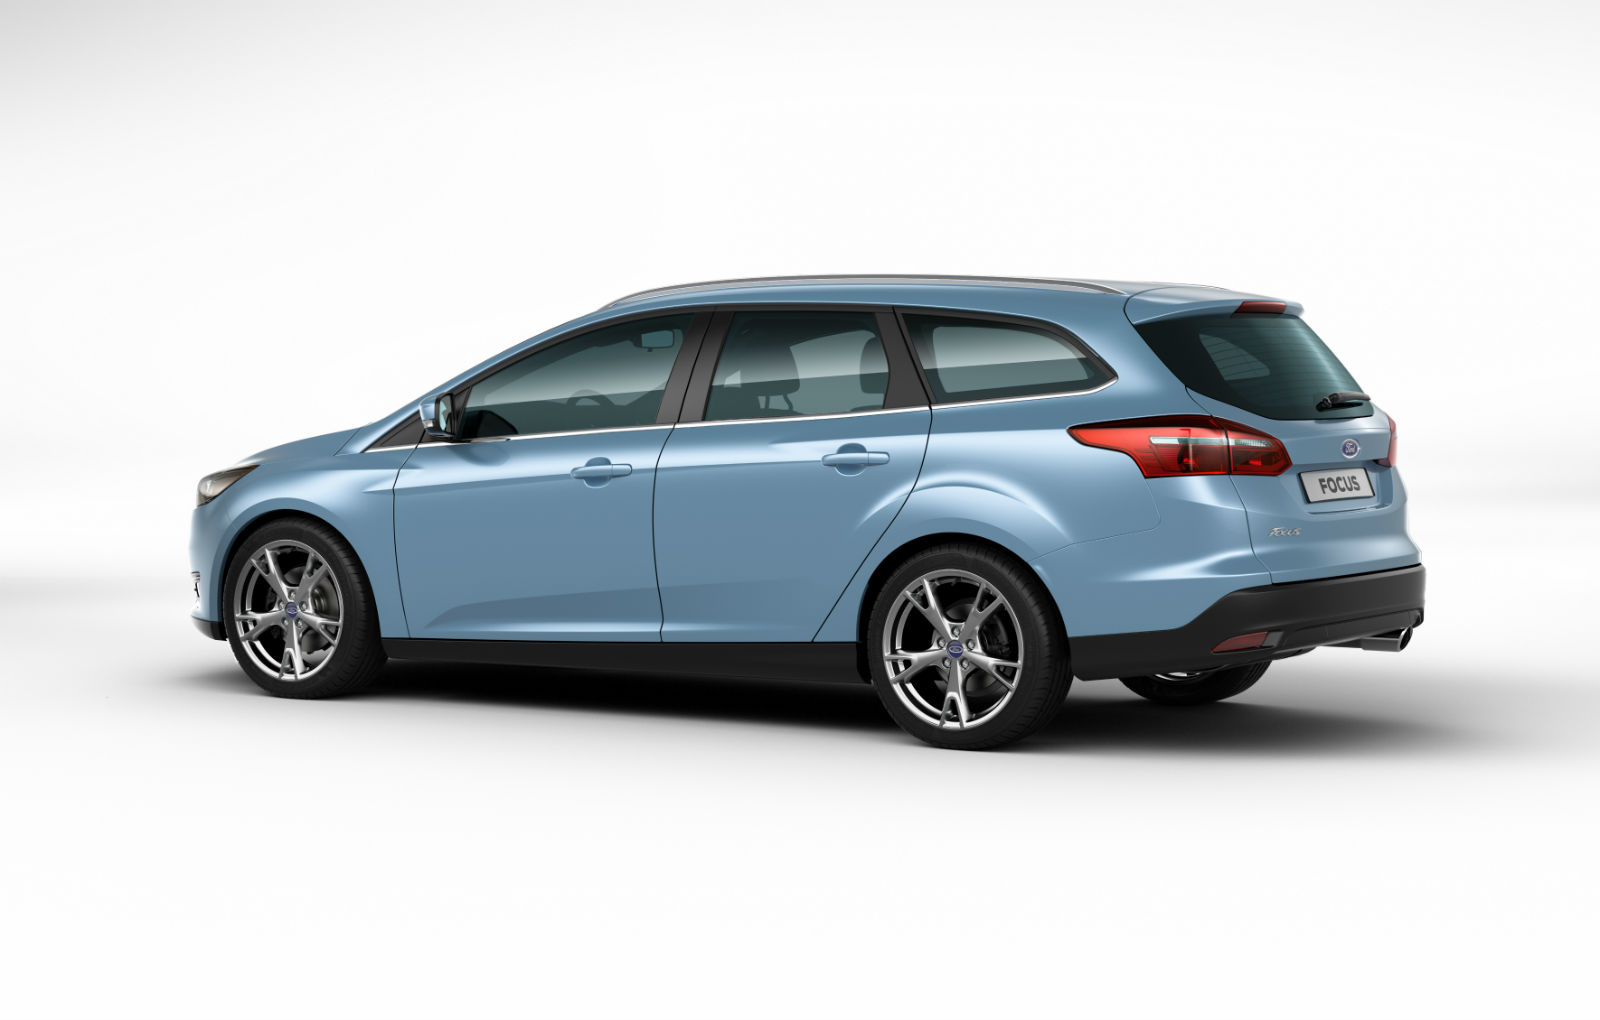 Ford Focus Wallpaper Photo Gallery